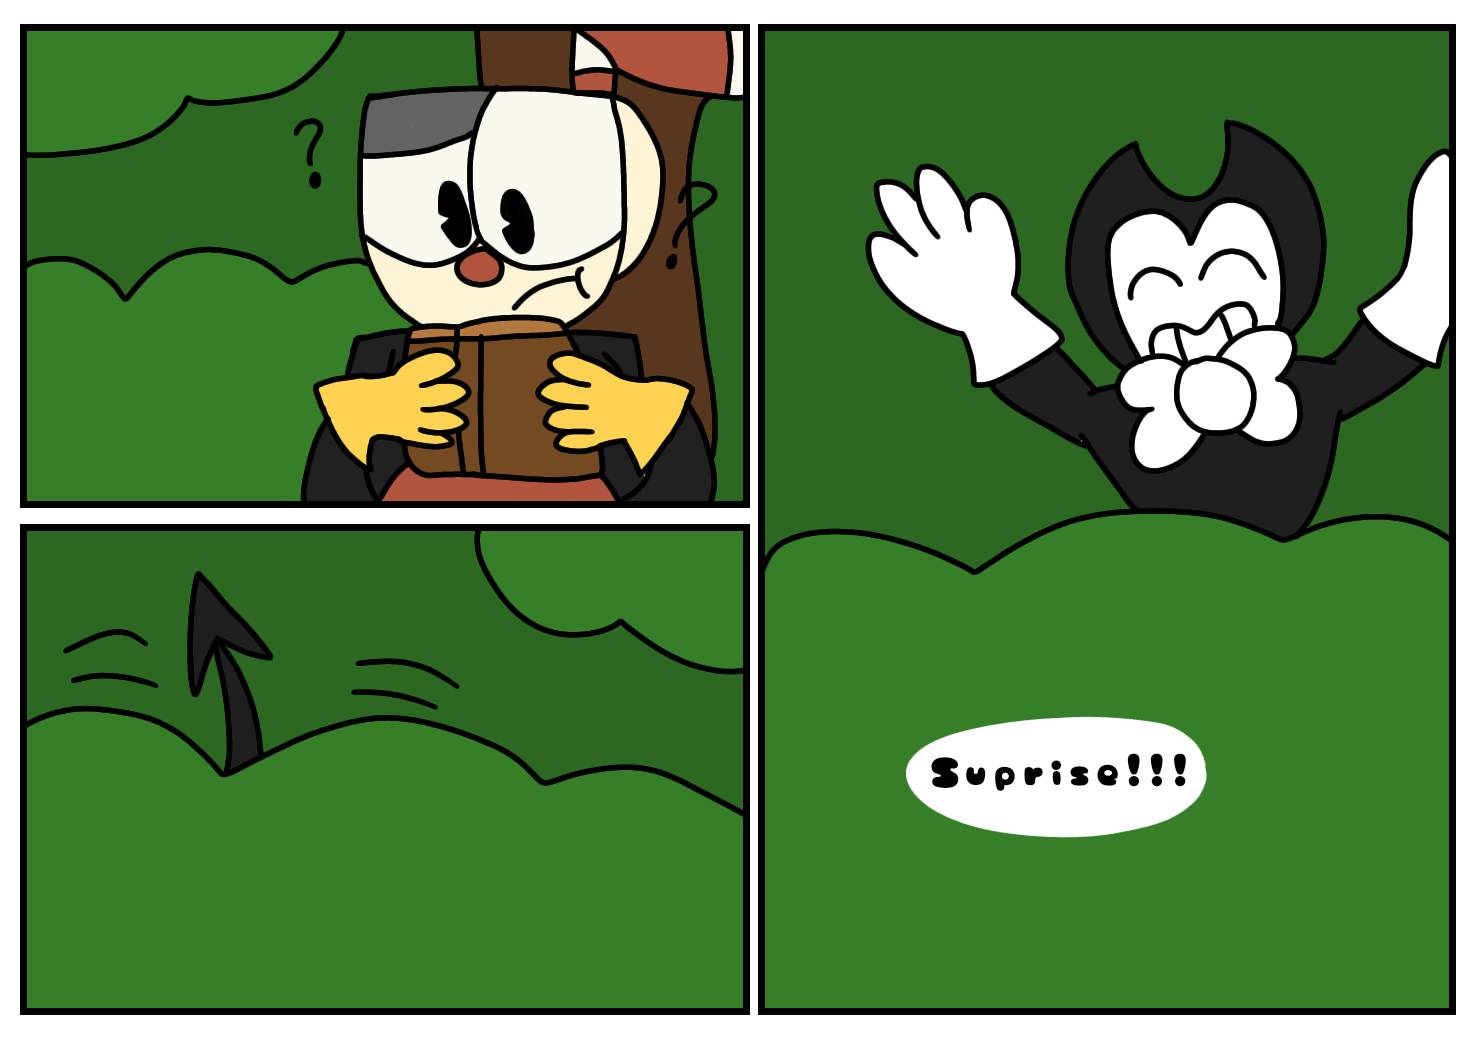 If bendy was in the cuphead show 2 by MerioTheCartoony on DeviantArt